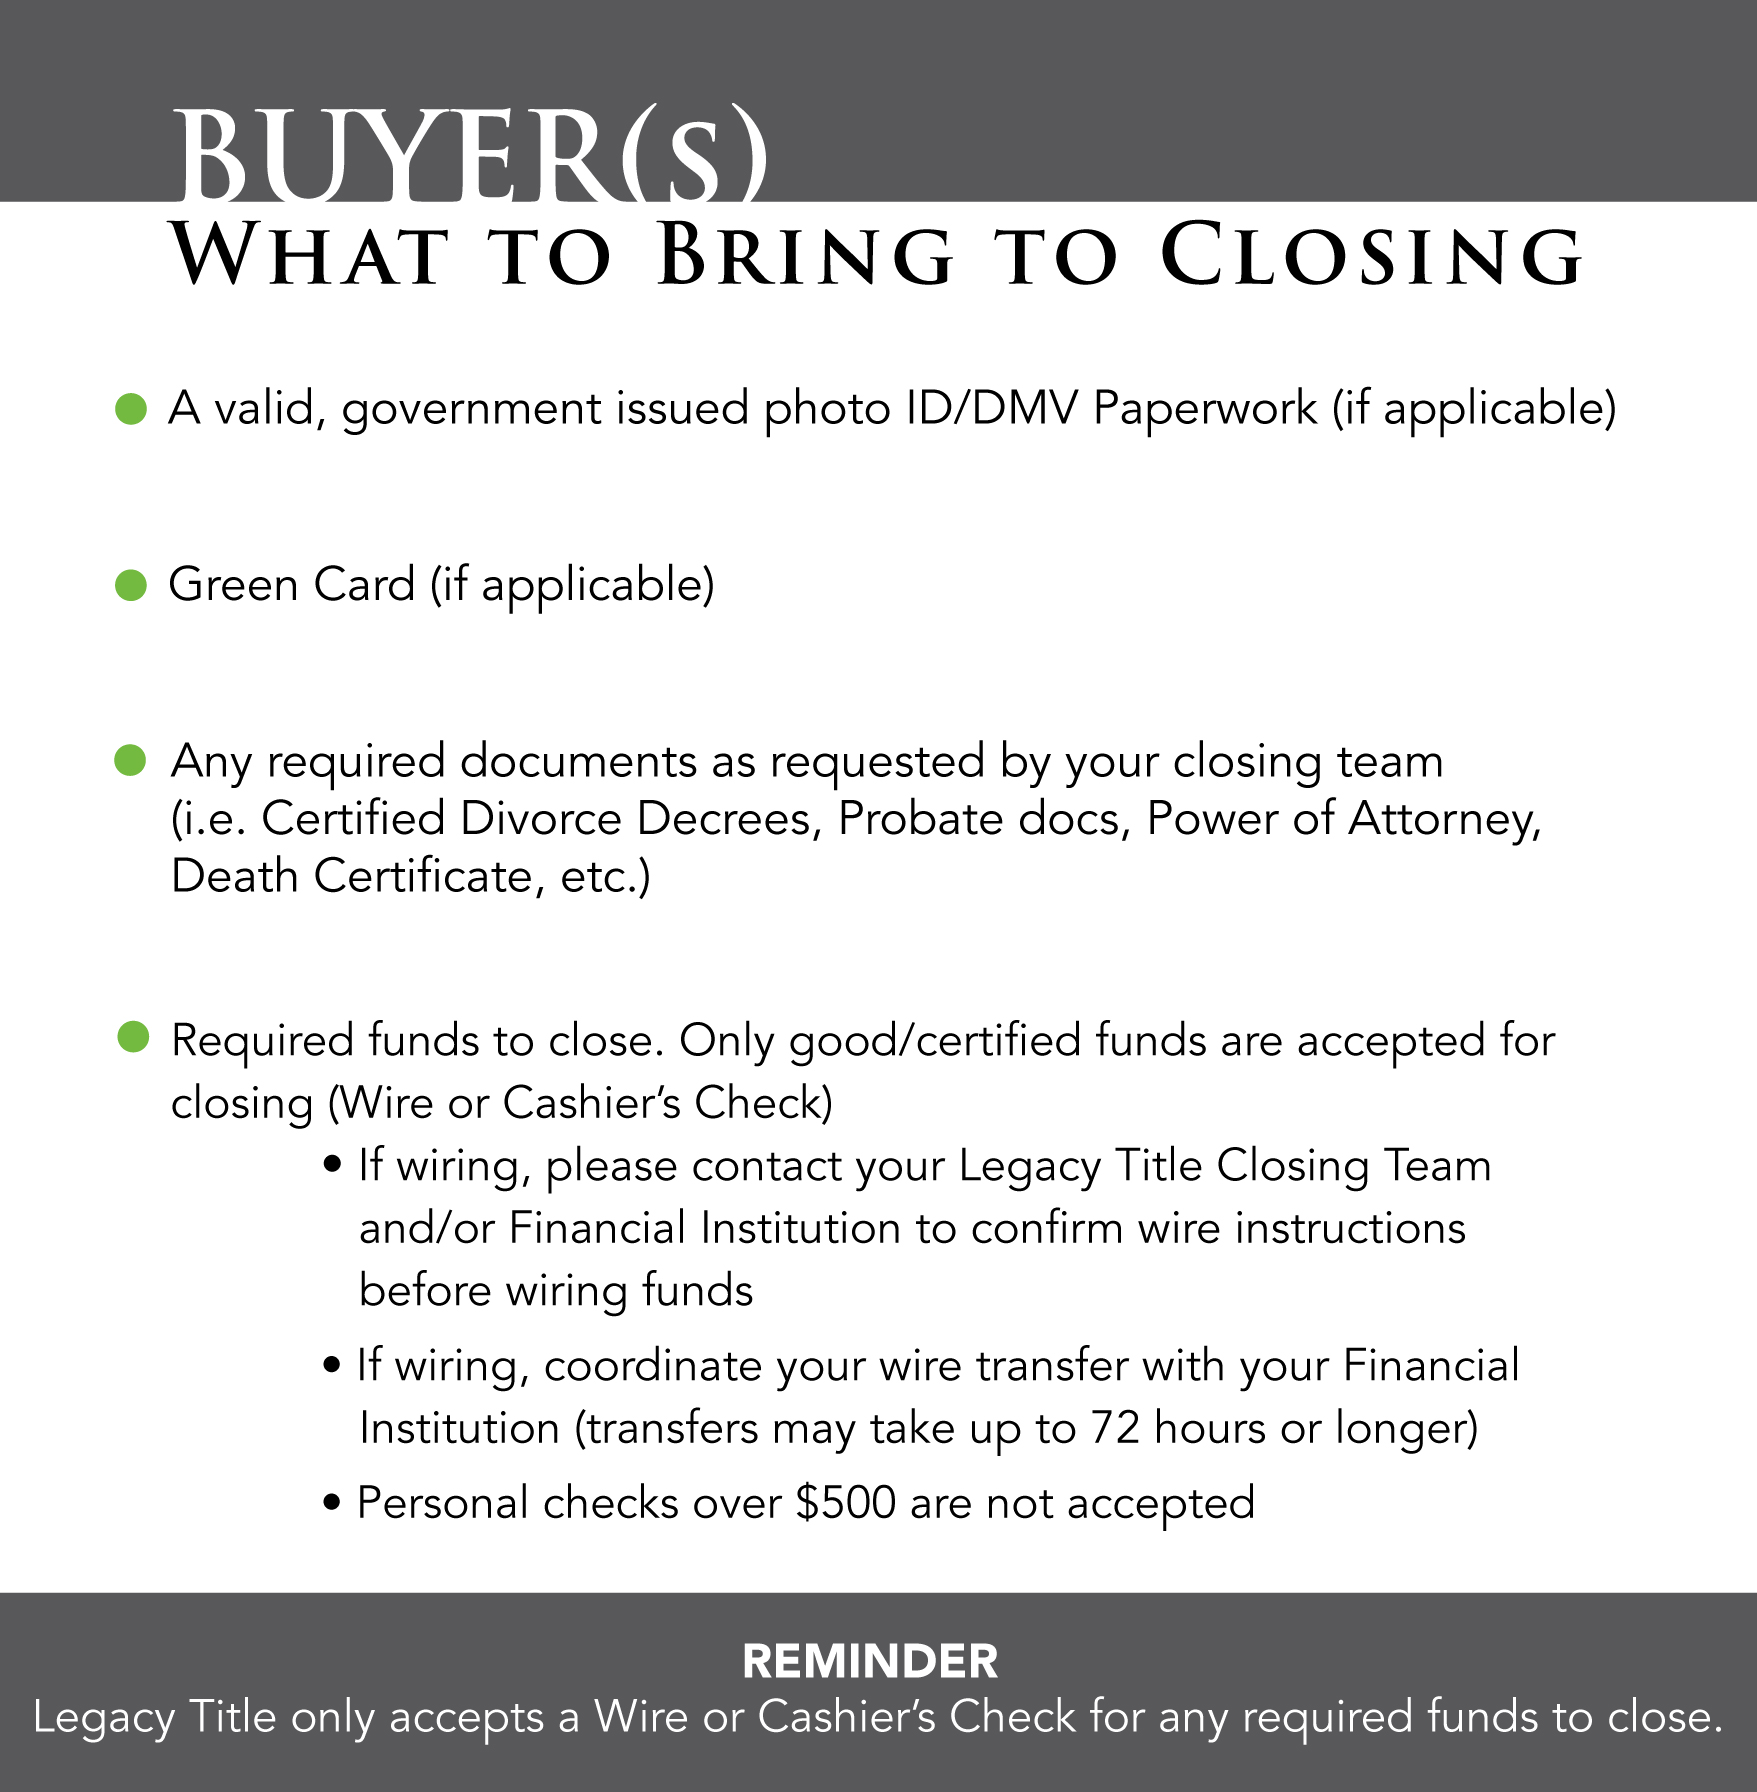 What To Bring To Closing - Buyers